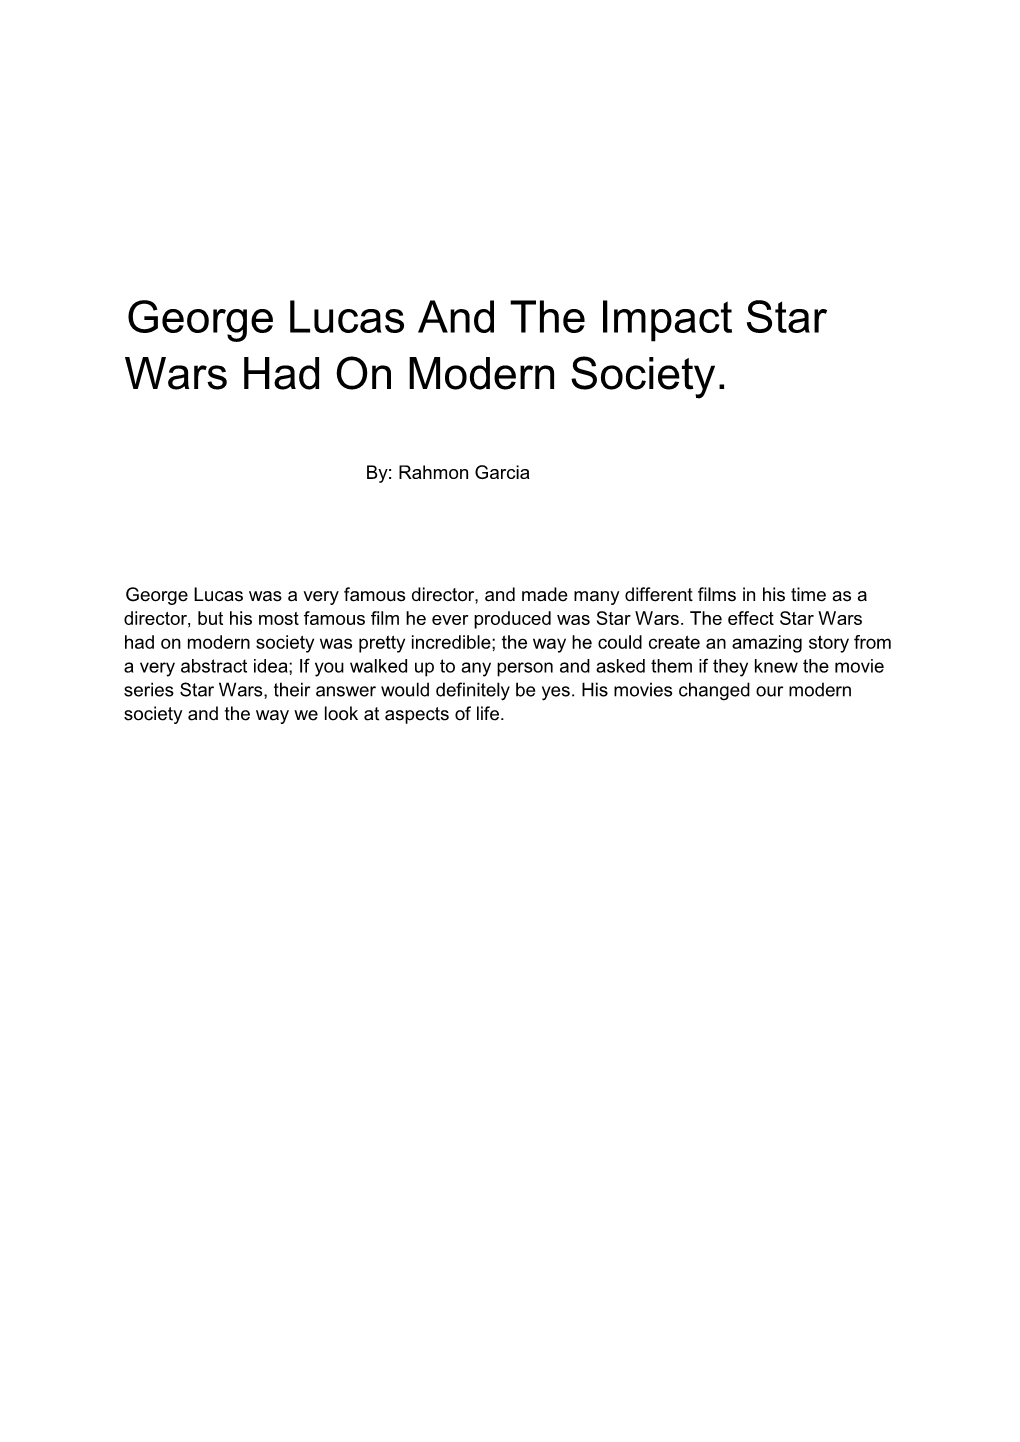 George Lucas and the Impact Star Wars Had on Modern Society